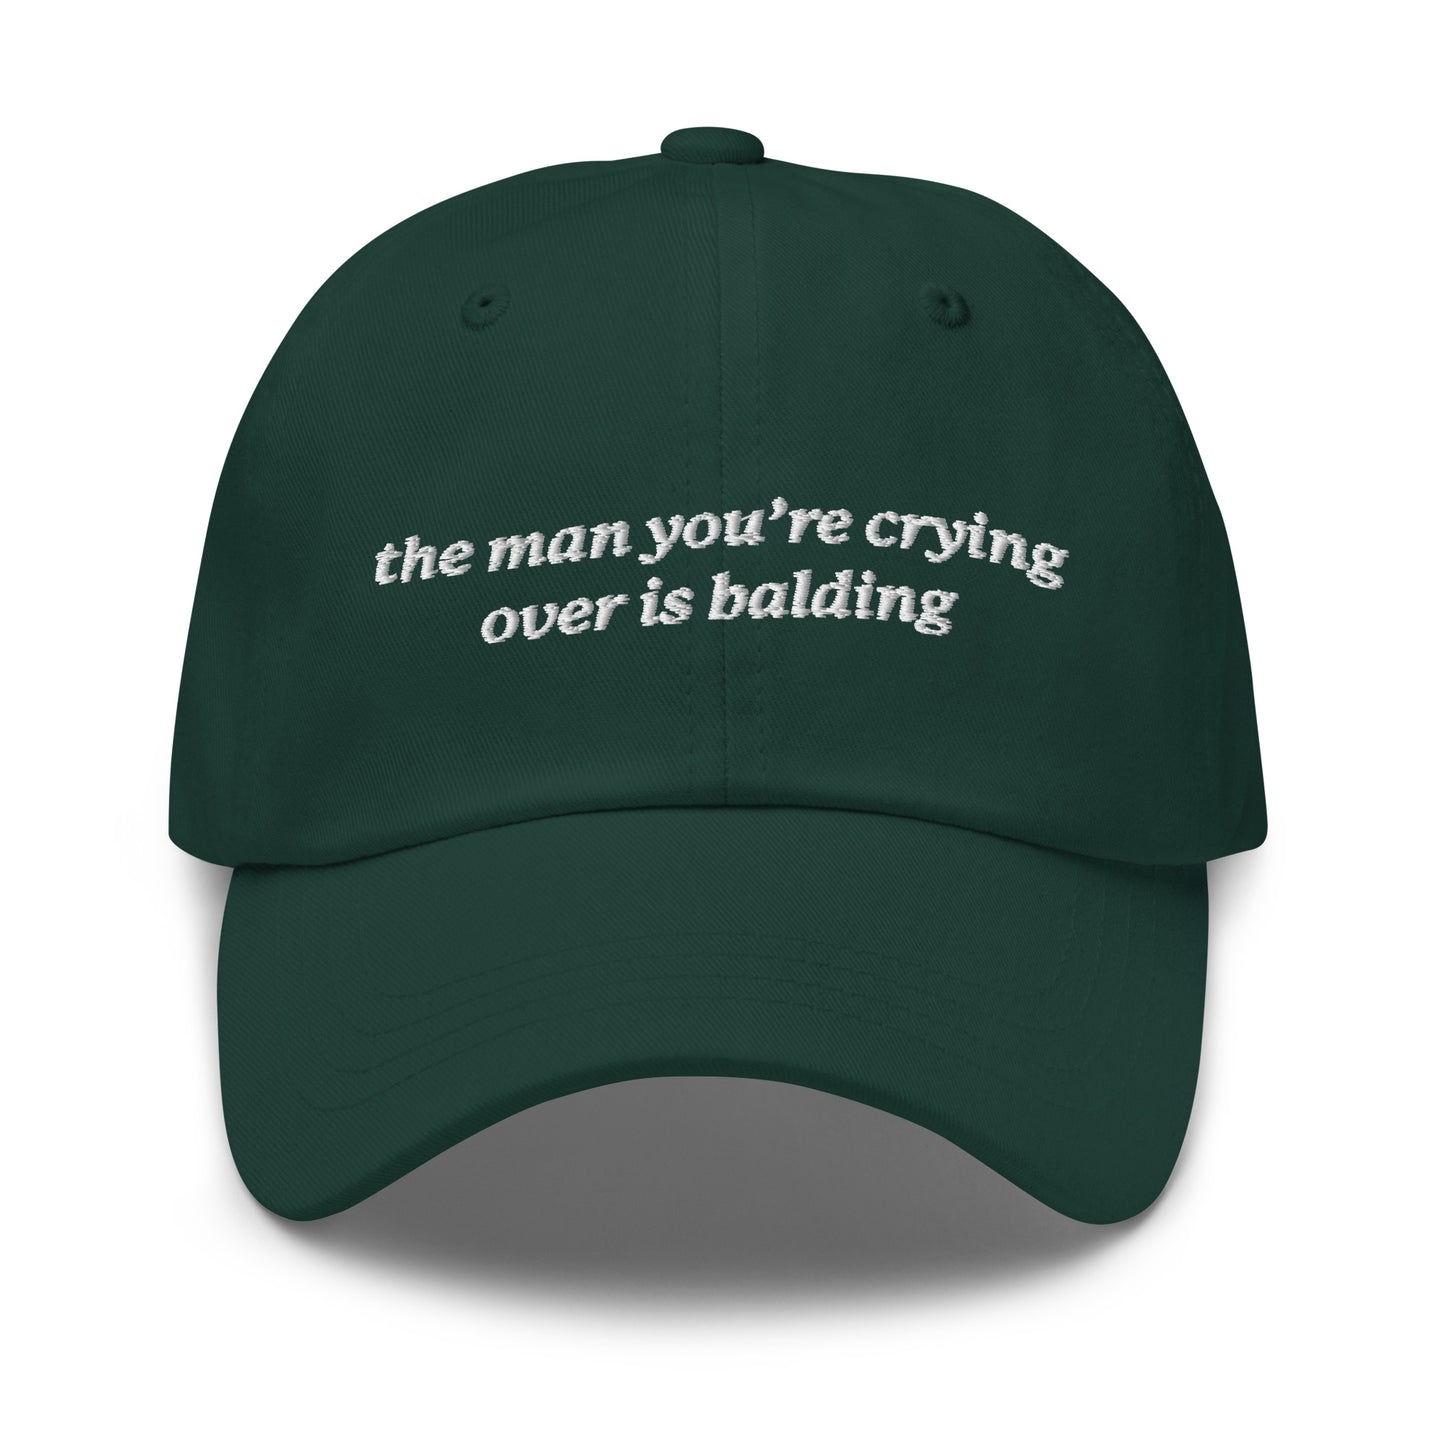 The Man You're Crying Over is Balding hat